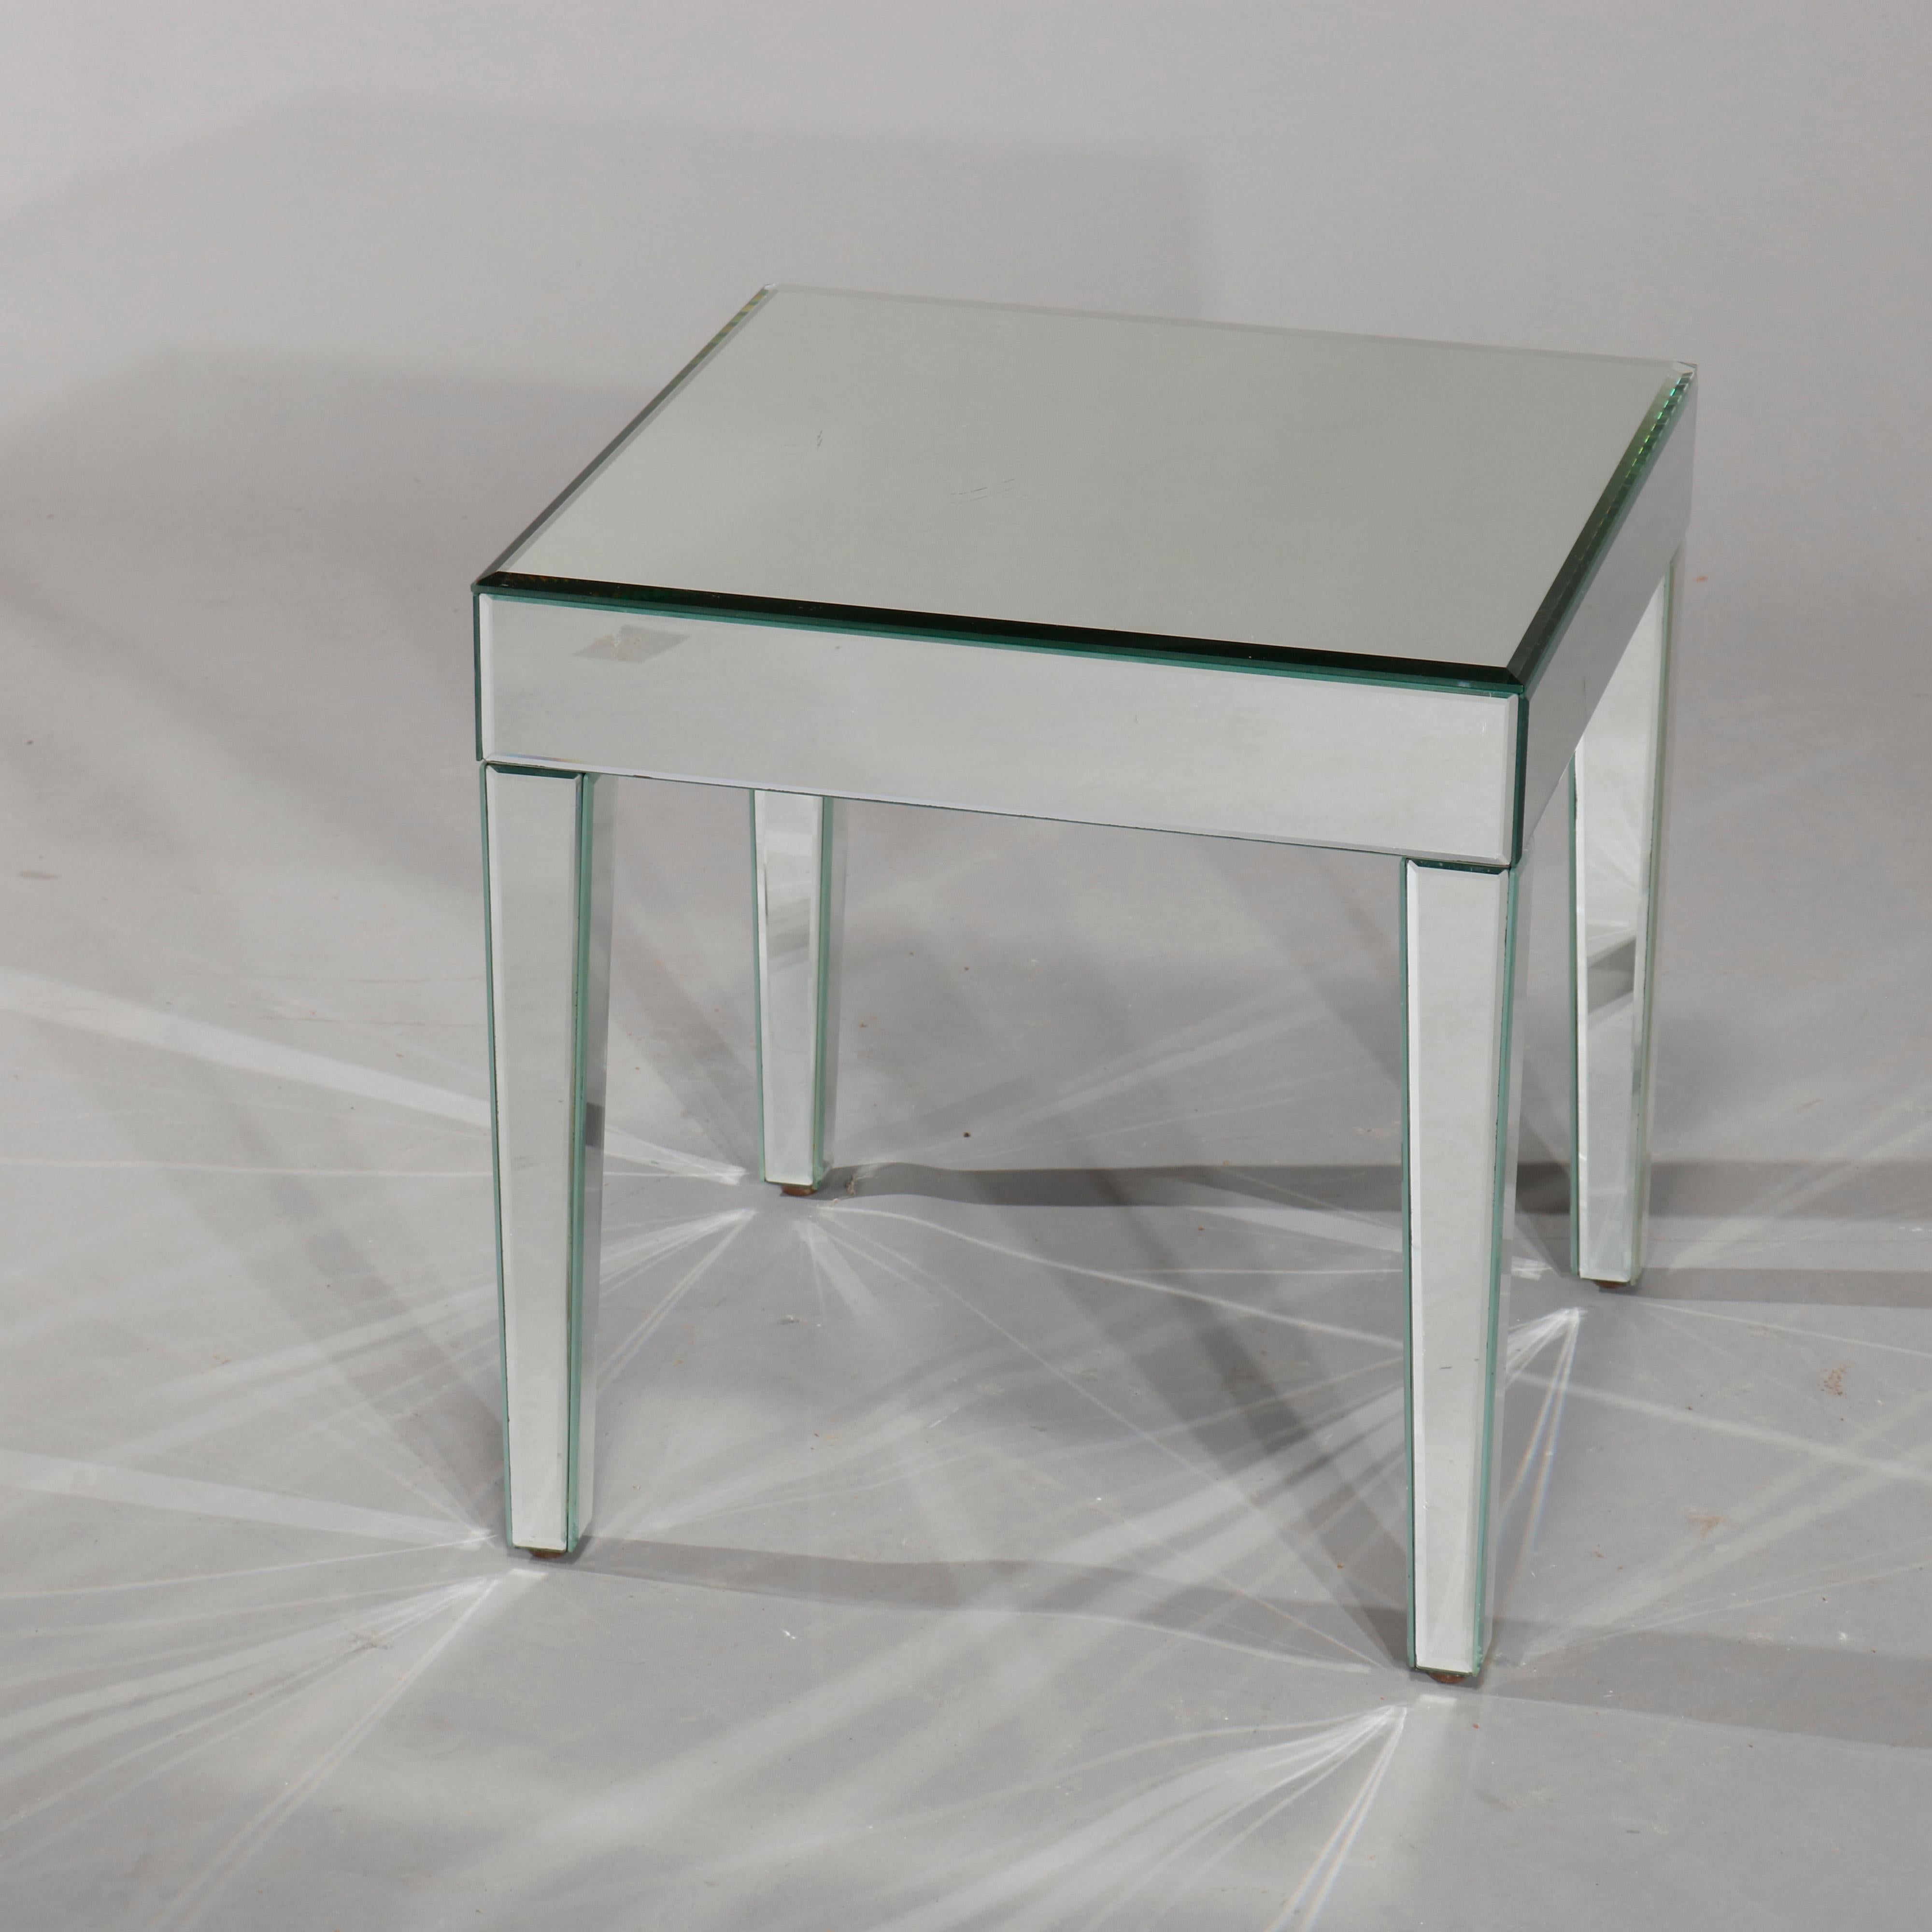 American Pair of Mid-Century Modern Mirrored Glass Side Tables, circa 1960